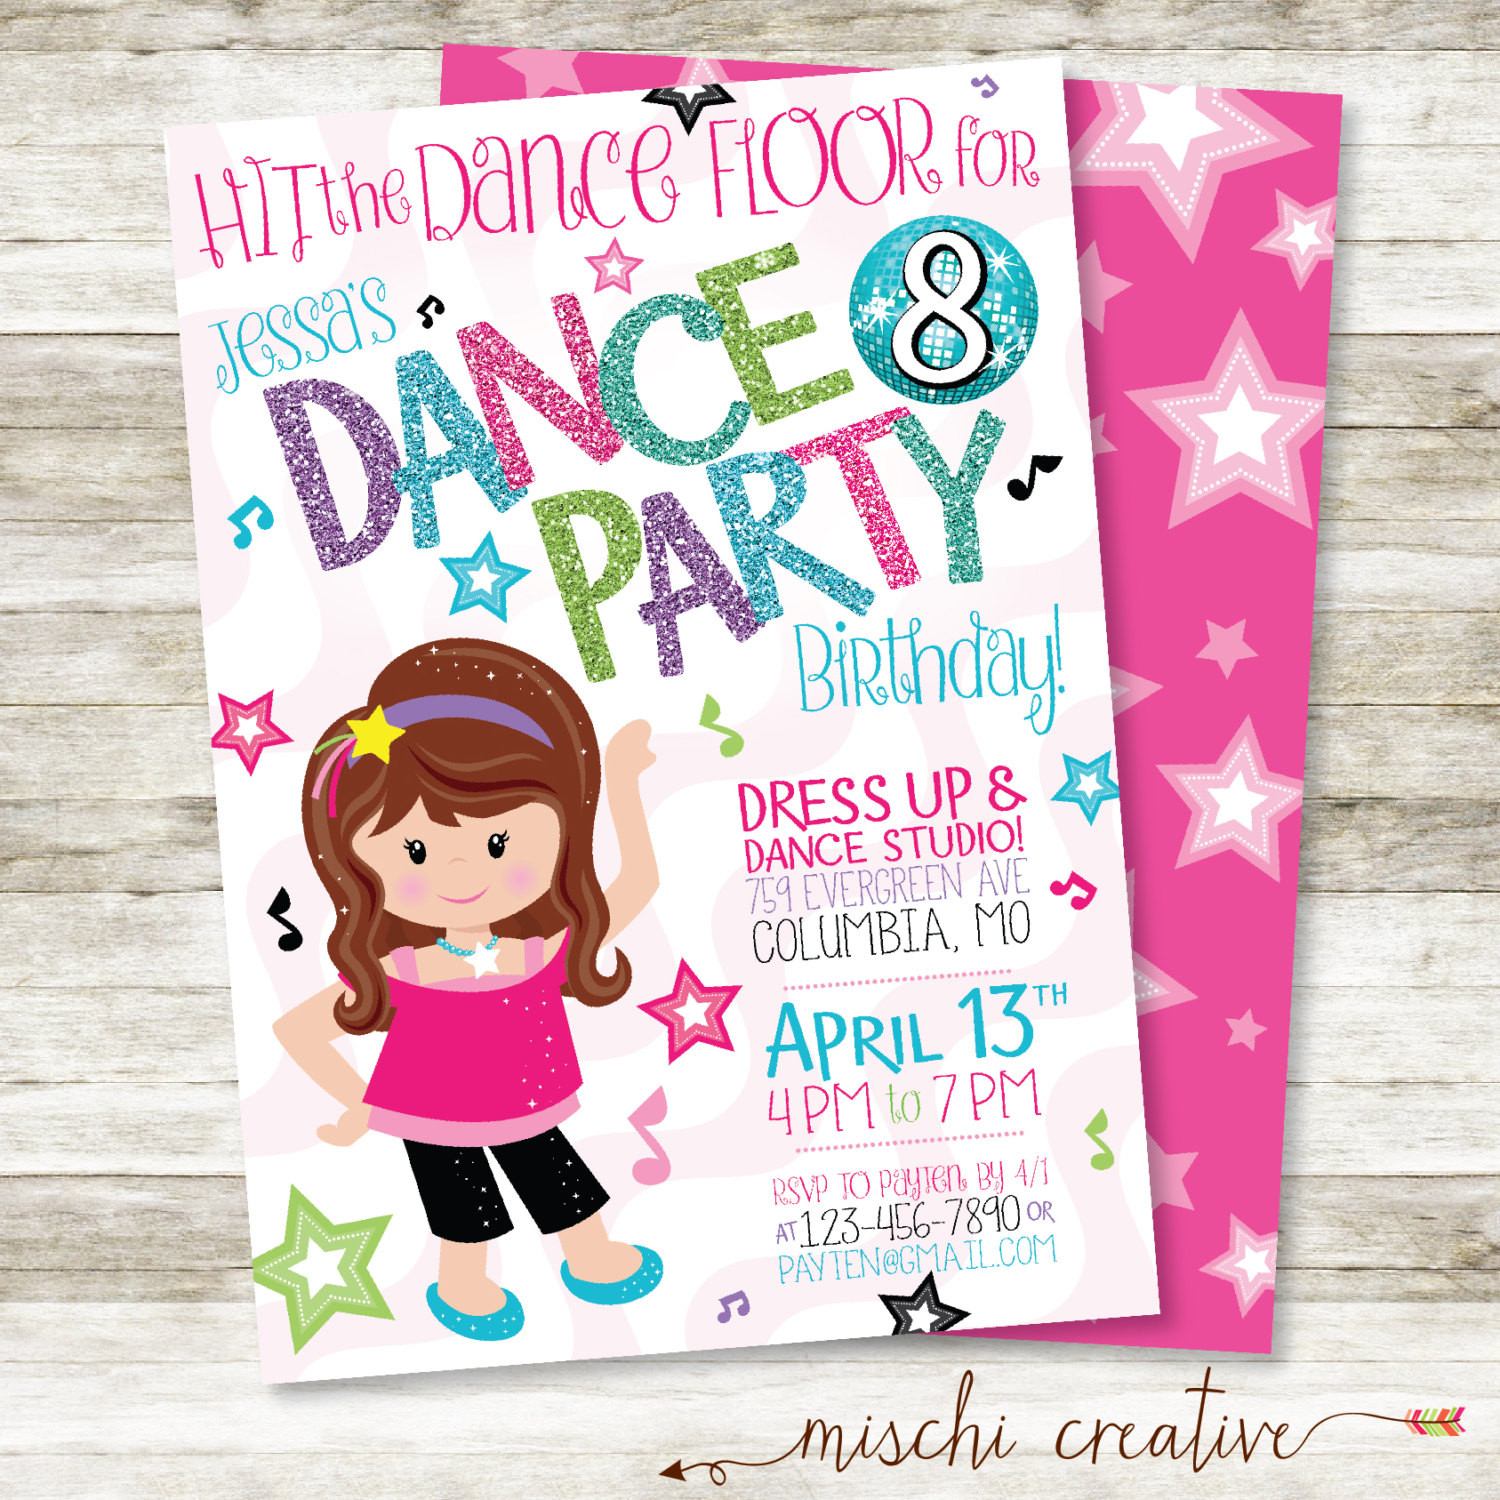 Dance Birthday Party Invitations
 Dance Party Birthday Invitation Little Girl Dancing Birthday